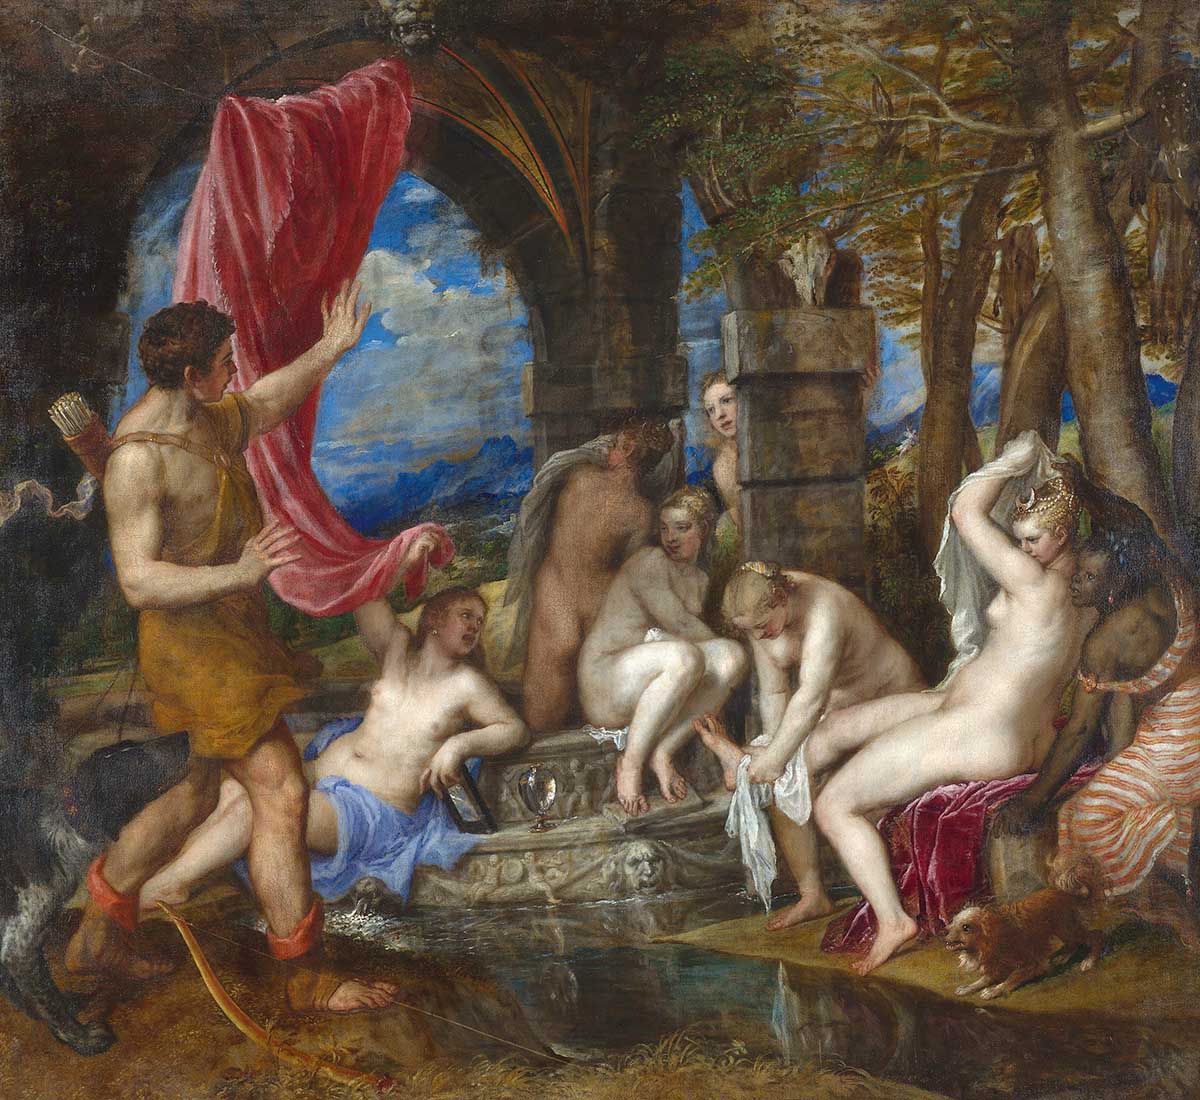 Diana and Actaeon, by Tiziano Vecellio (Titian), 1556-59, National Gallery and National Galleries of Scotland.